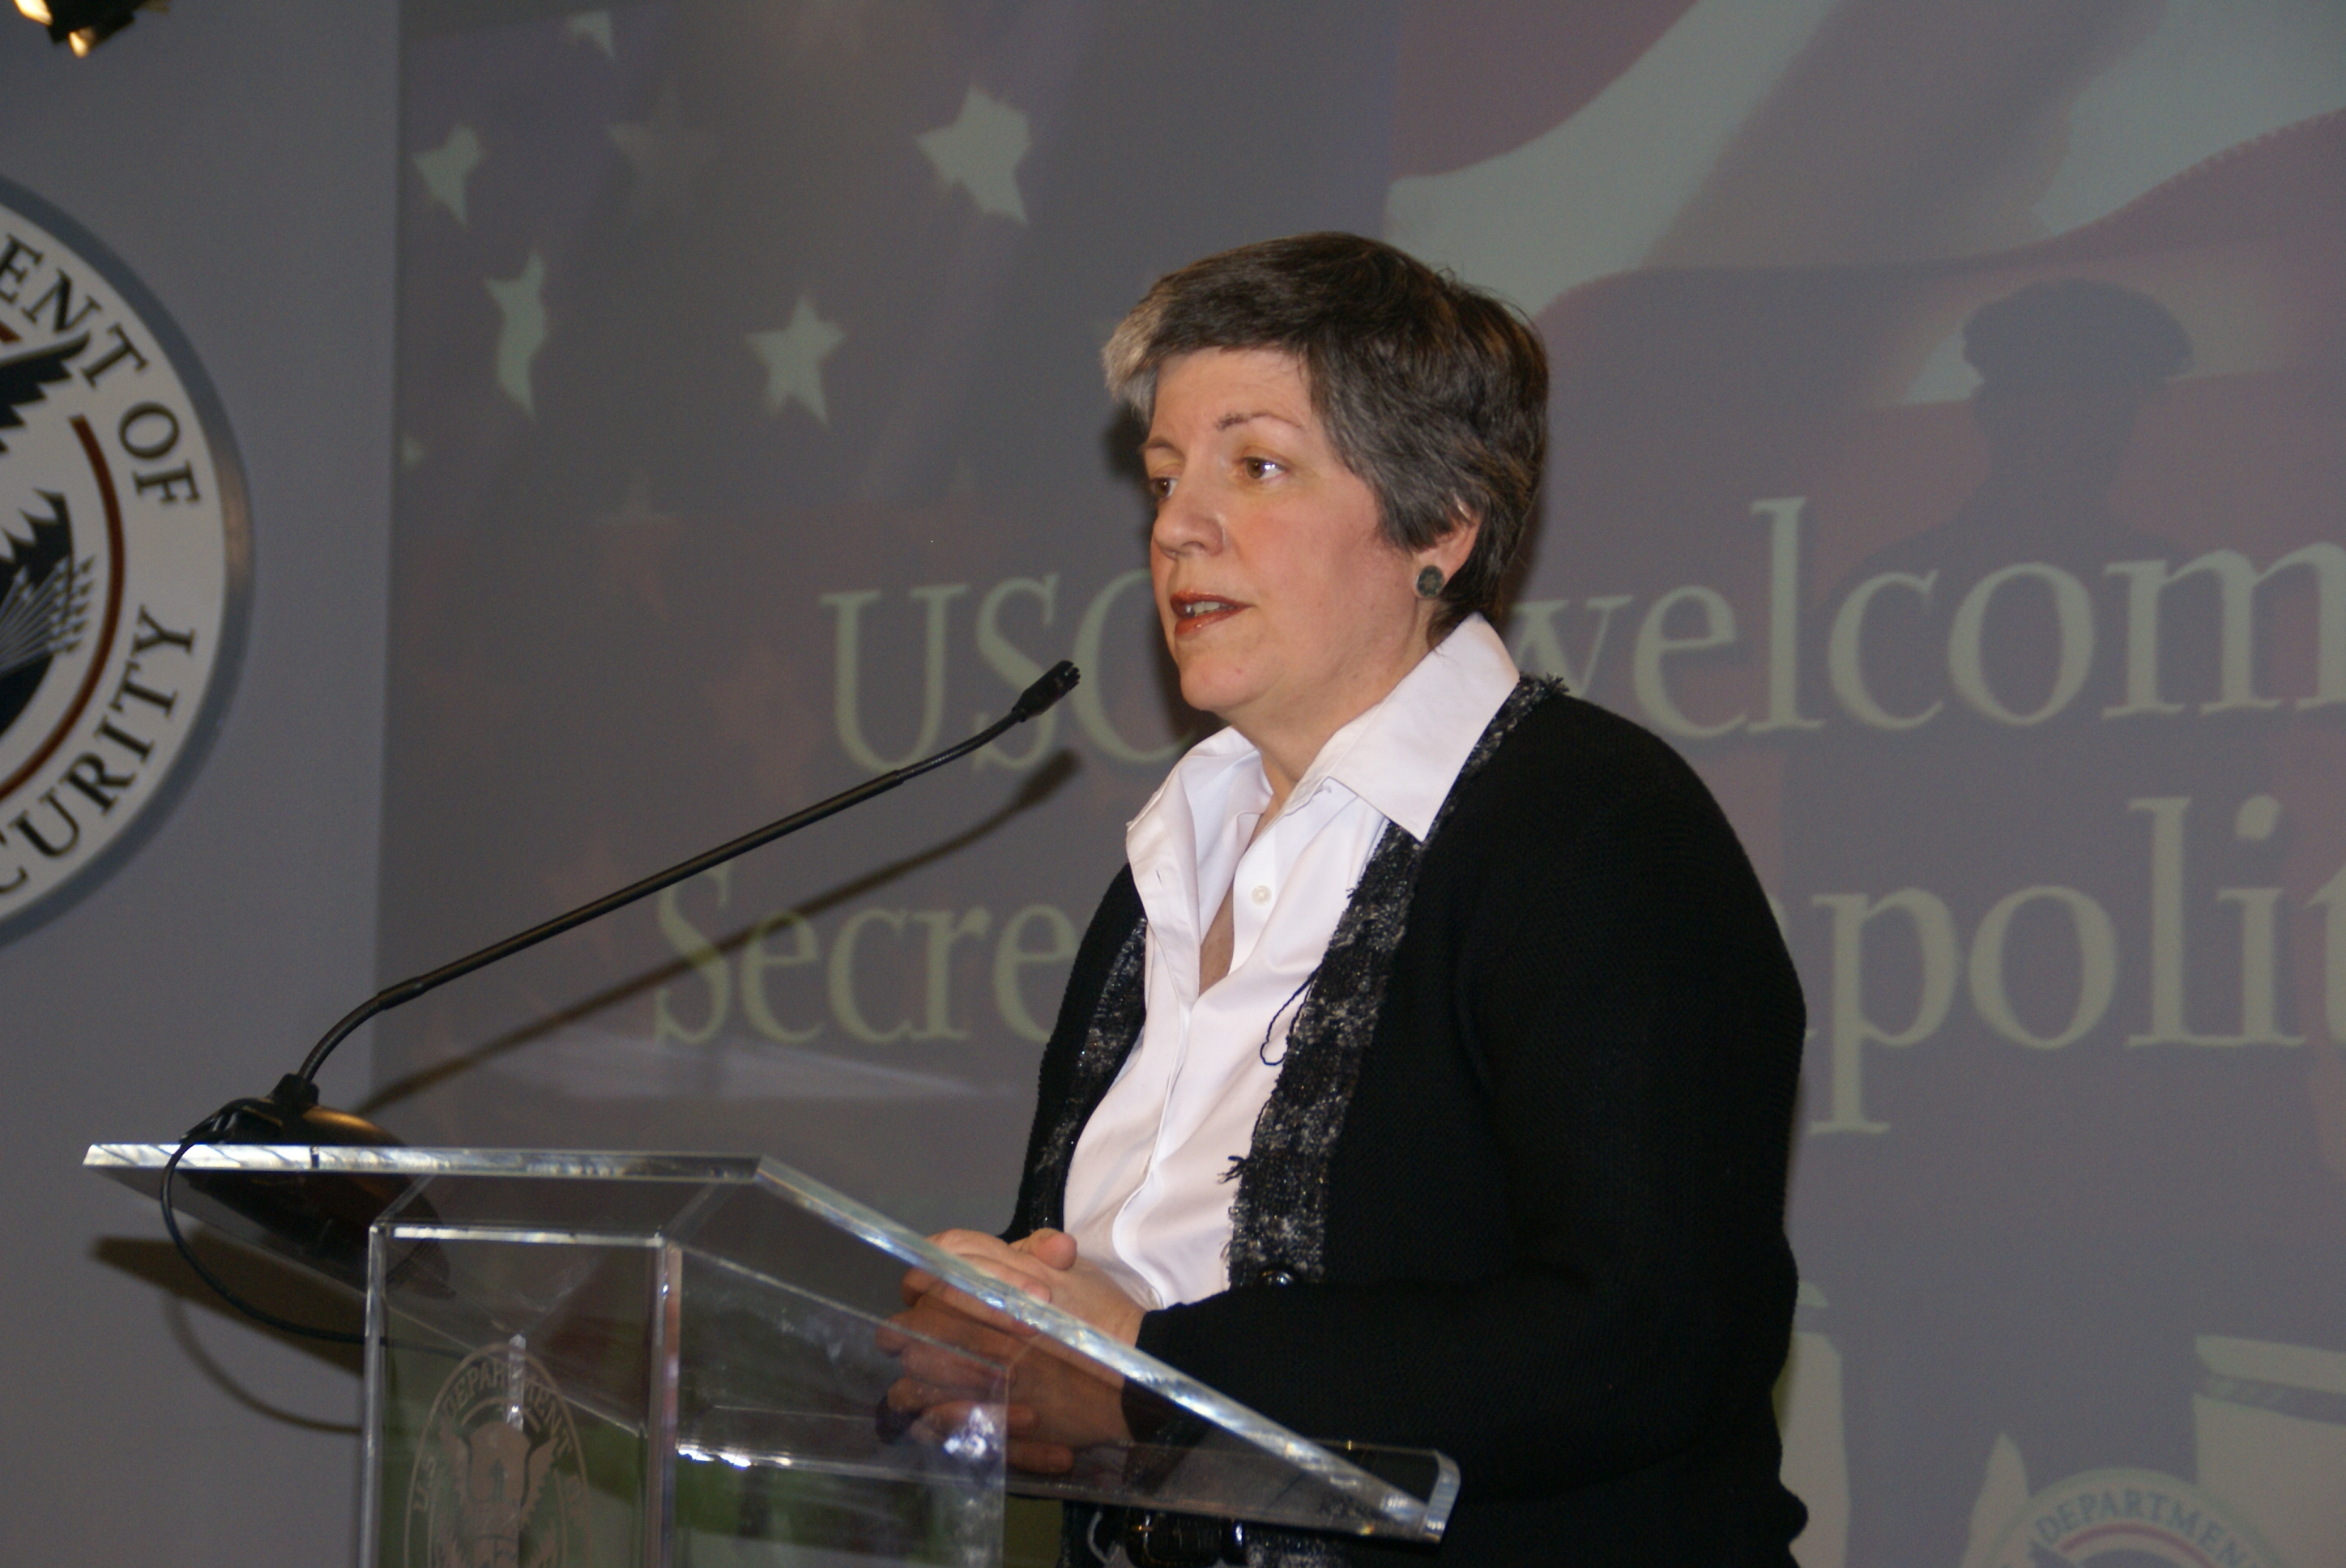 January 27, 2009 - Secretary of Homeland Security Napolitano greets employees at U.S. Citizenship and Immigration Services headquarters in Washington, D.C. where she receives briefings from the three USCIS directorates.  (USCIS Photo/Buckson)